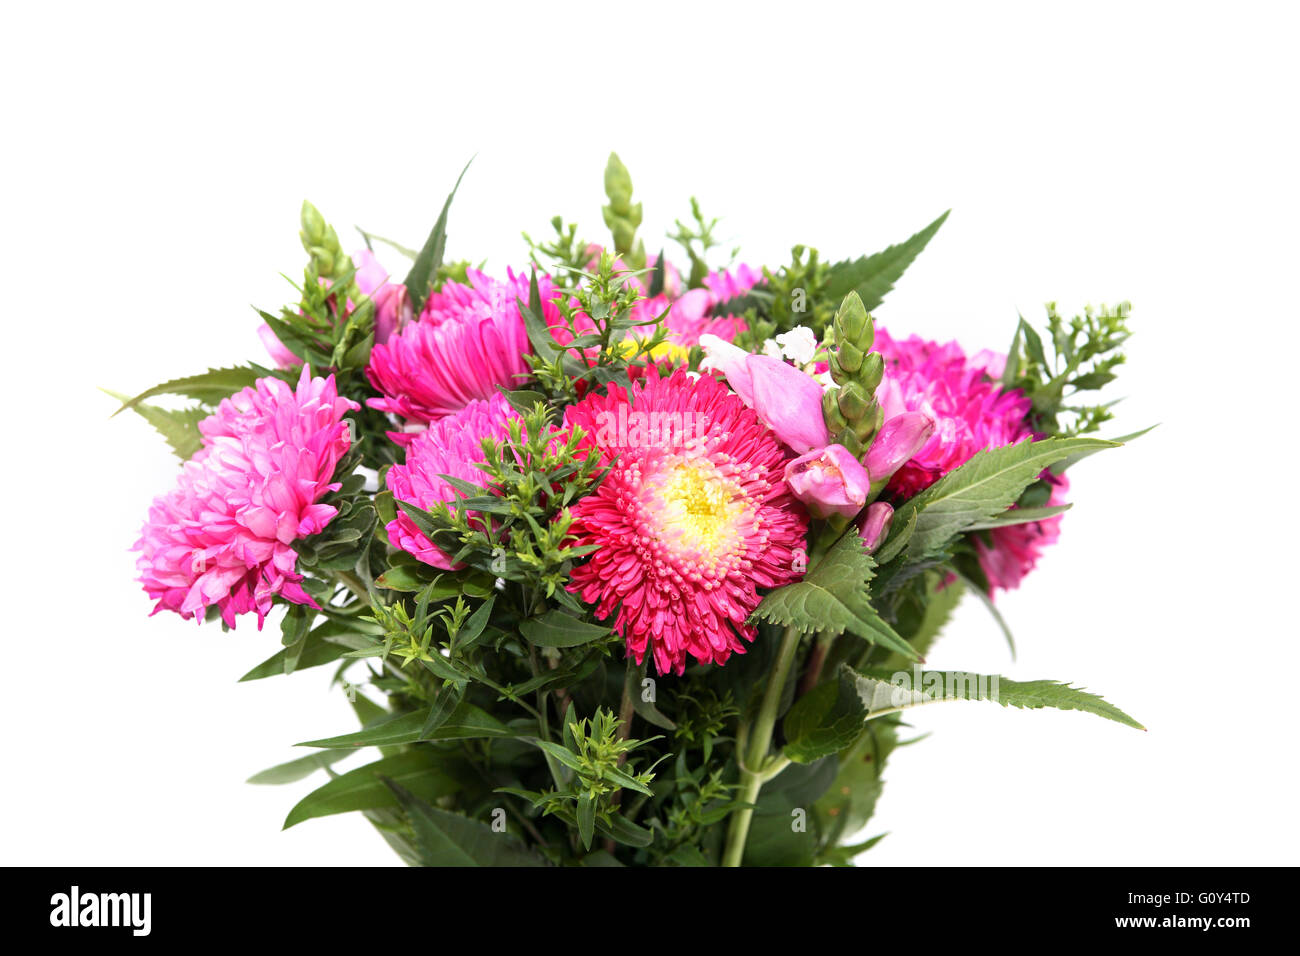 Beautiful bunch of cultivated flowers on white background Stock Photo